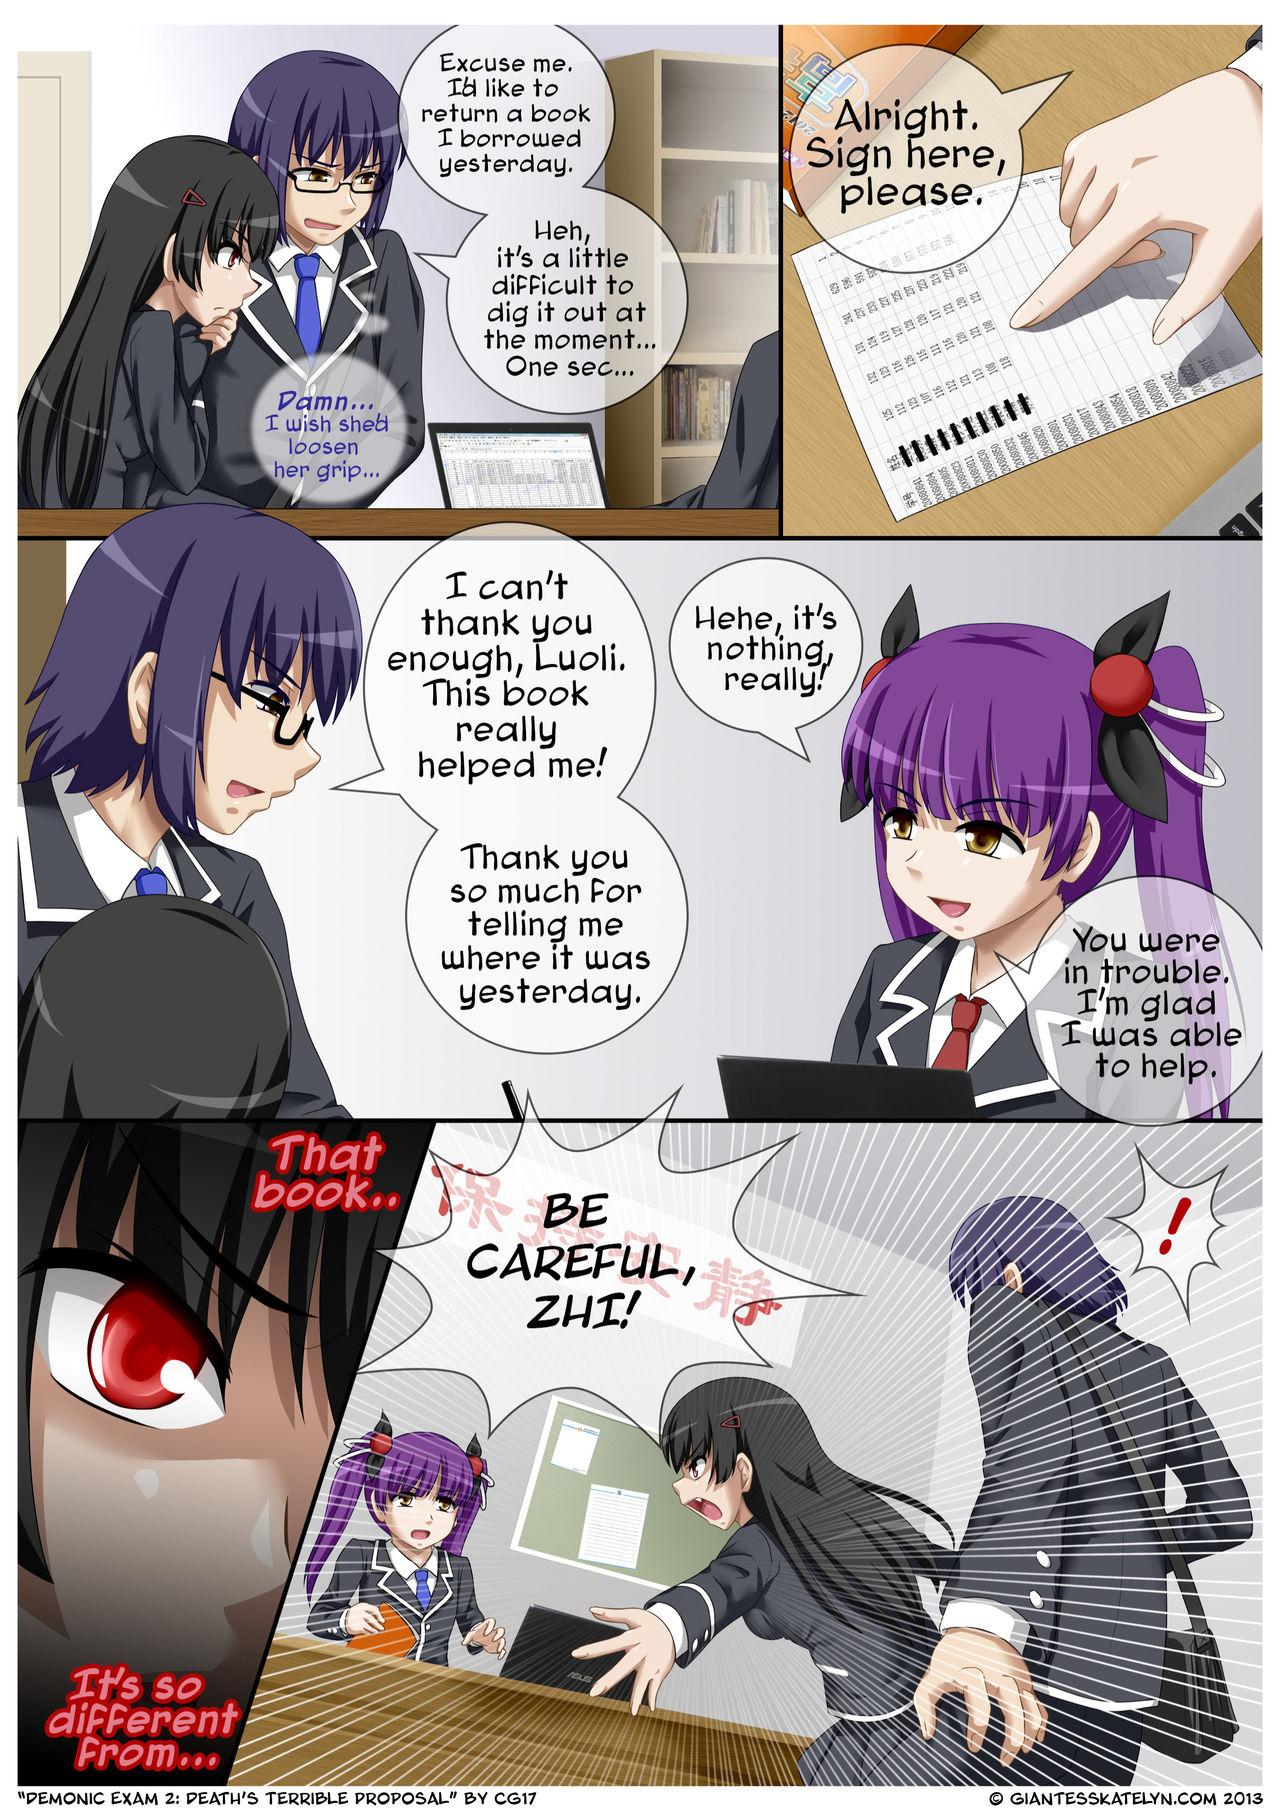 Vadia Demonic Exam 2: Death's Terrible Proposal Trans - Page 8